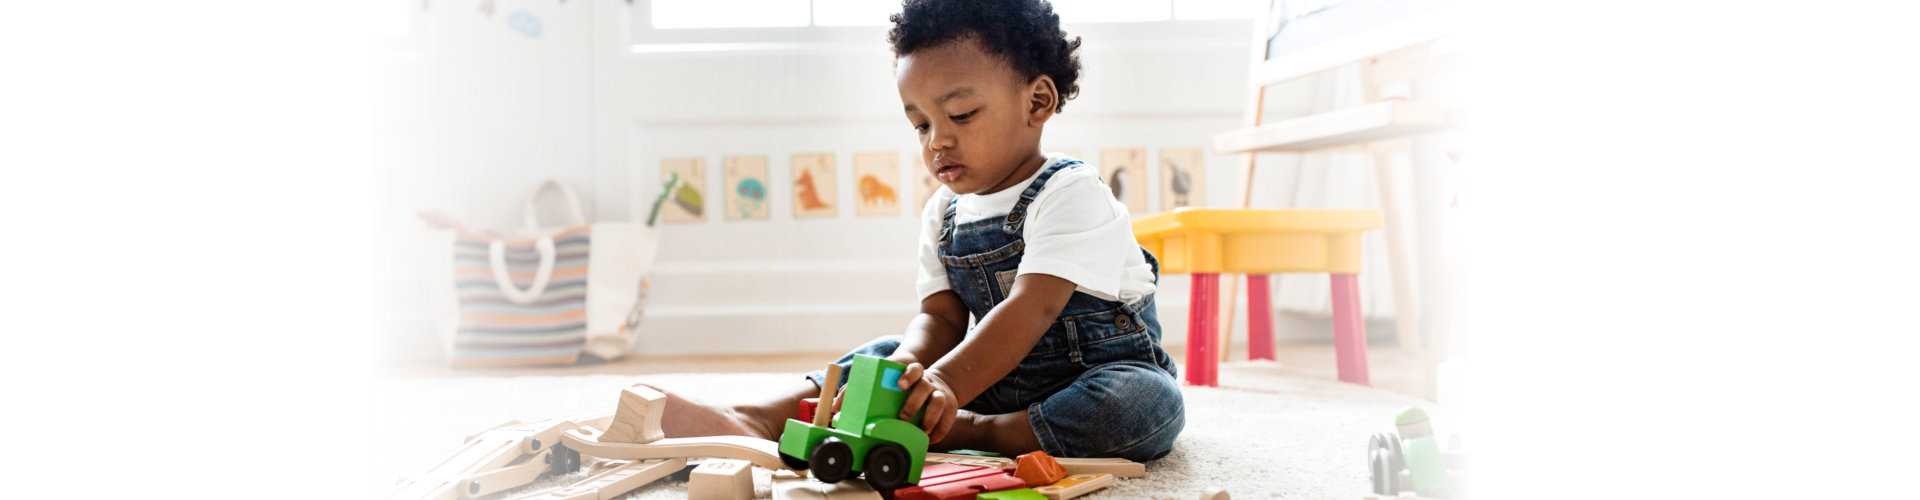 image of a toddler playing